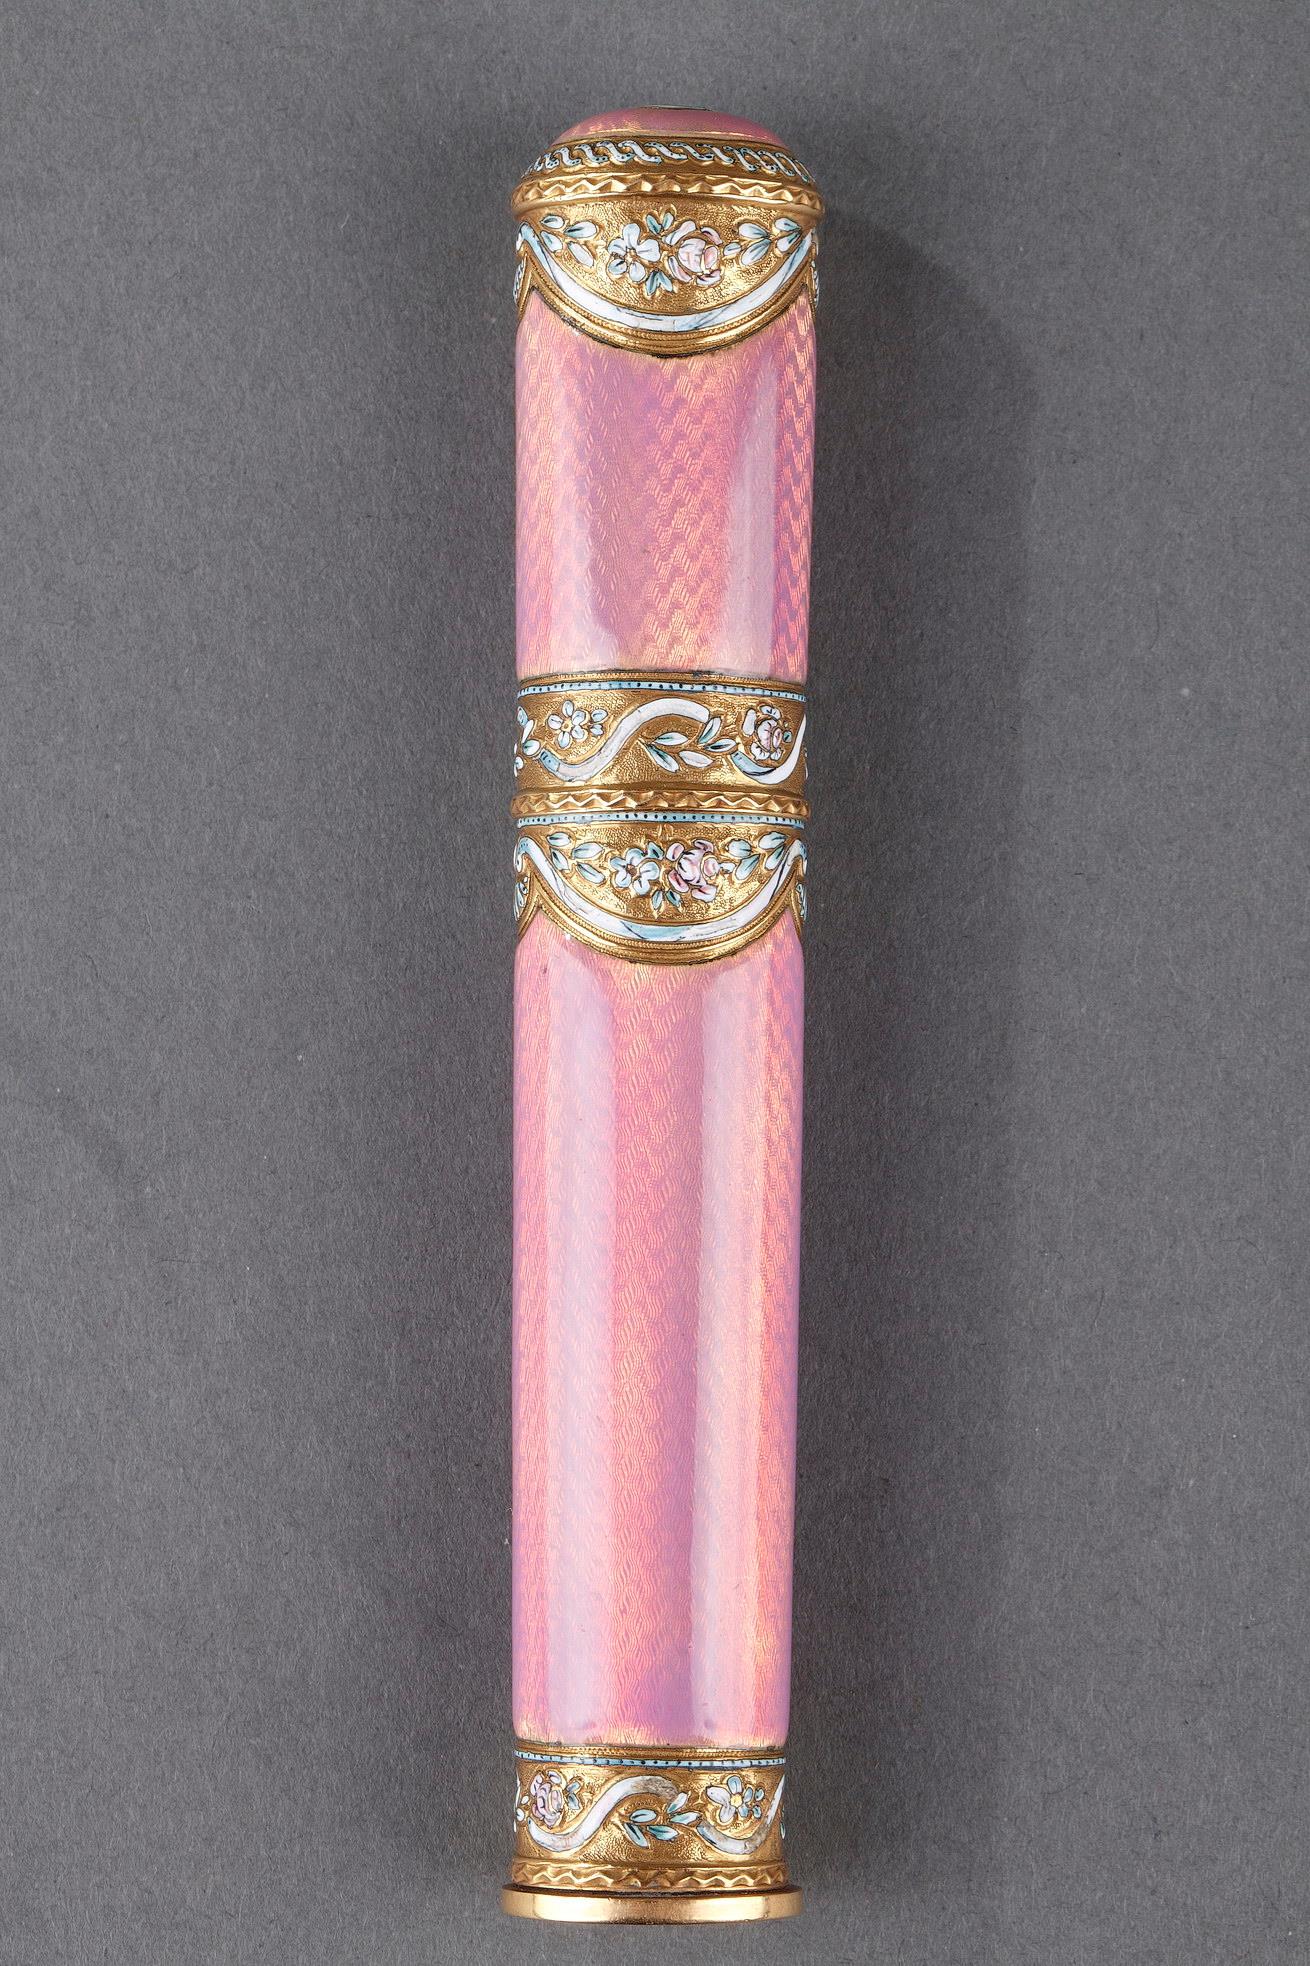 Gold and pink enamel case for wax. <br>
End of the 18th century. 